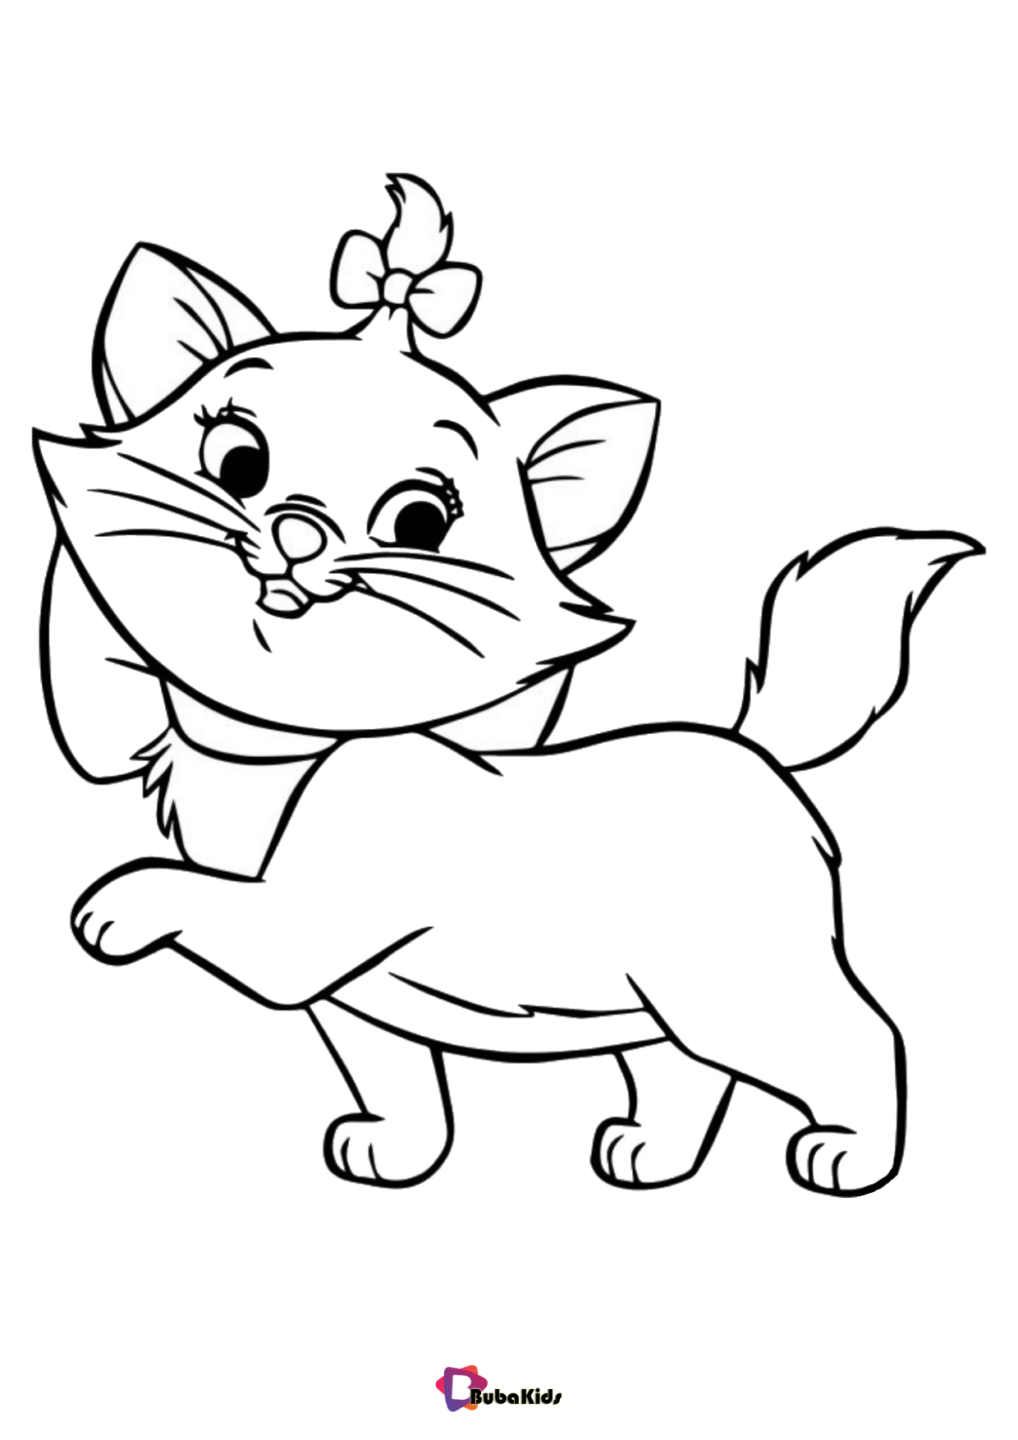 Cut lovely cat coloring page BubaKids com